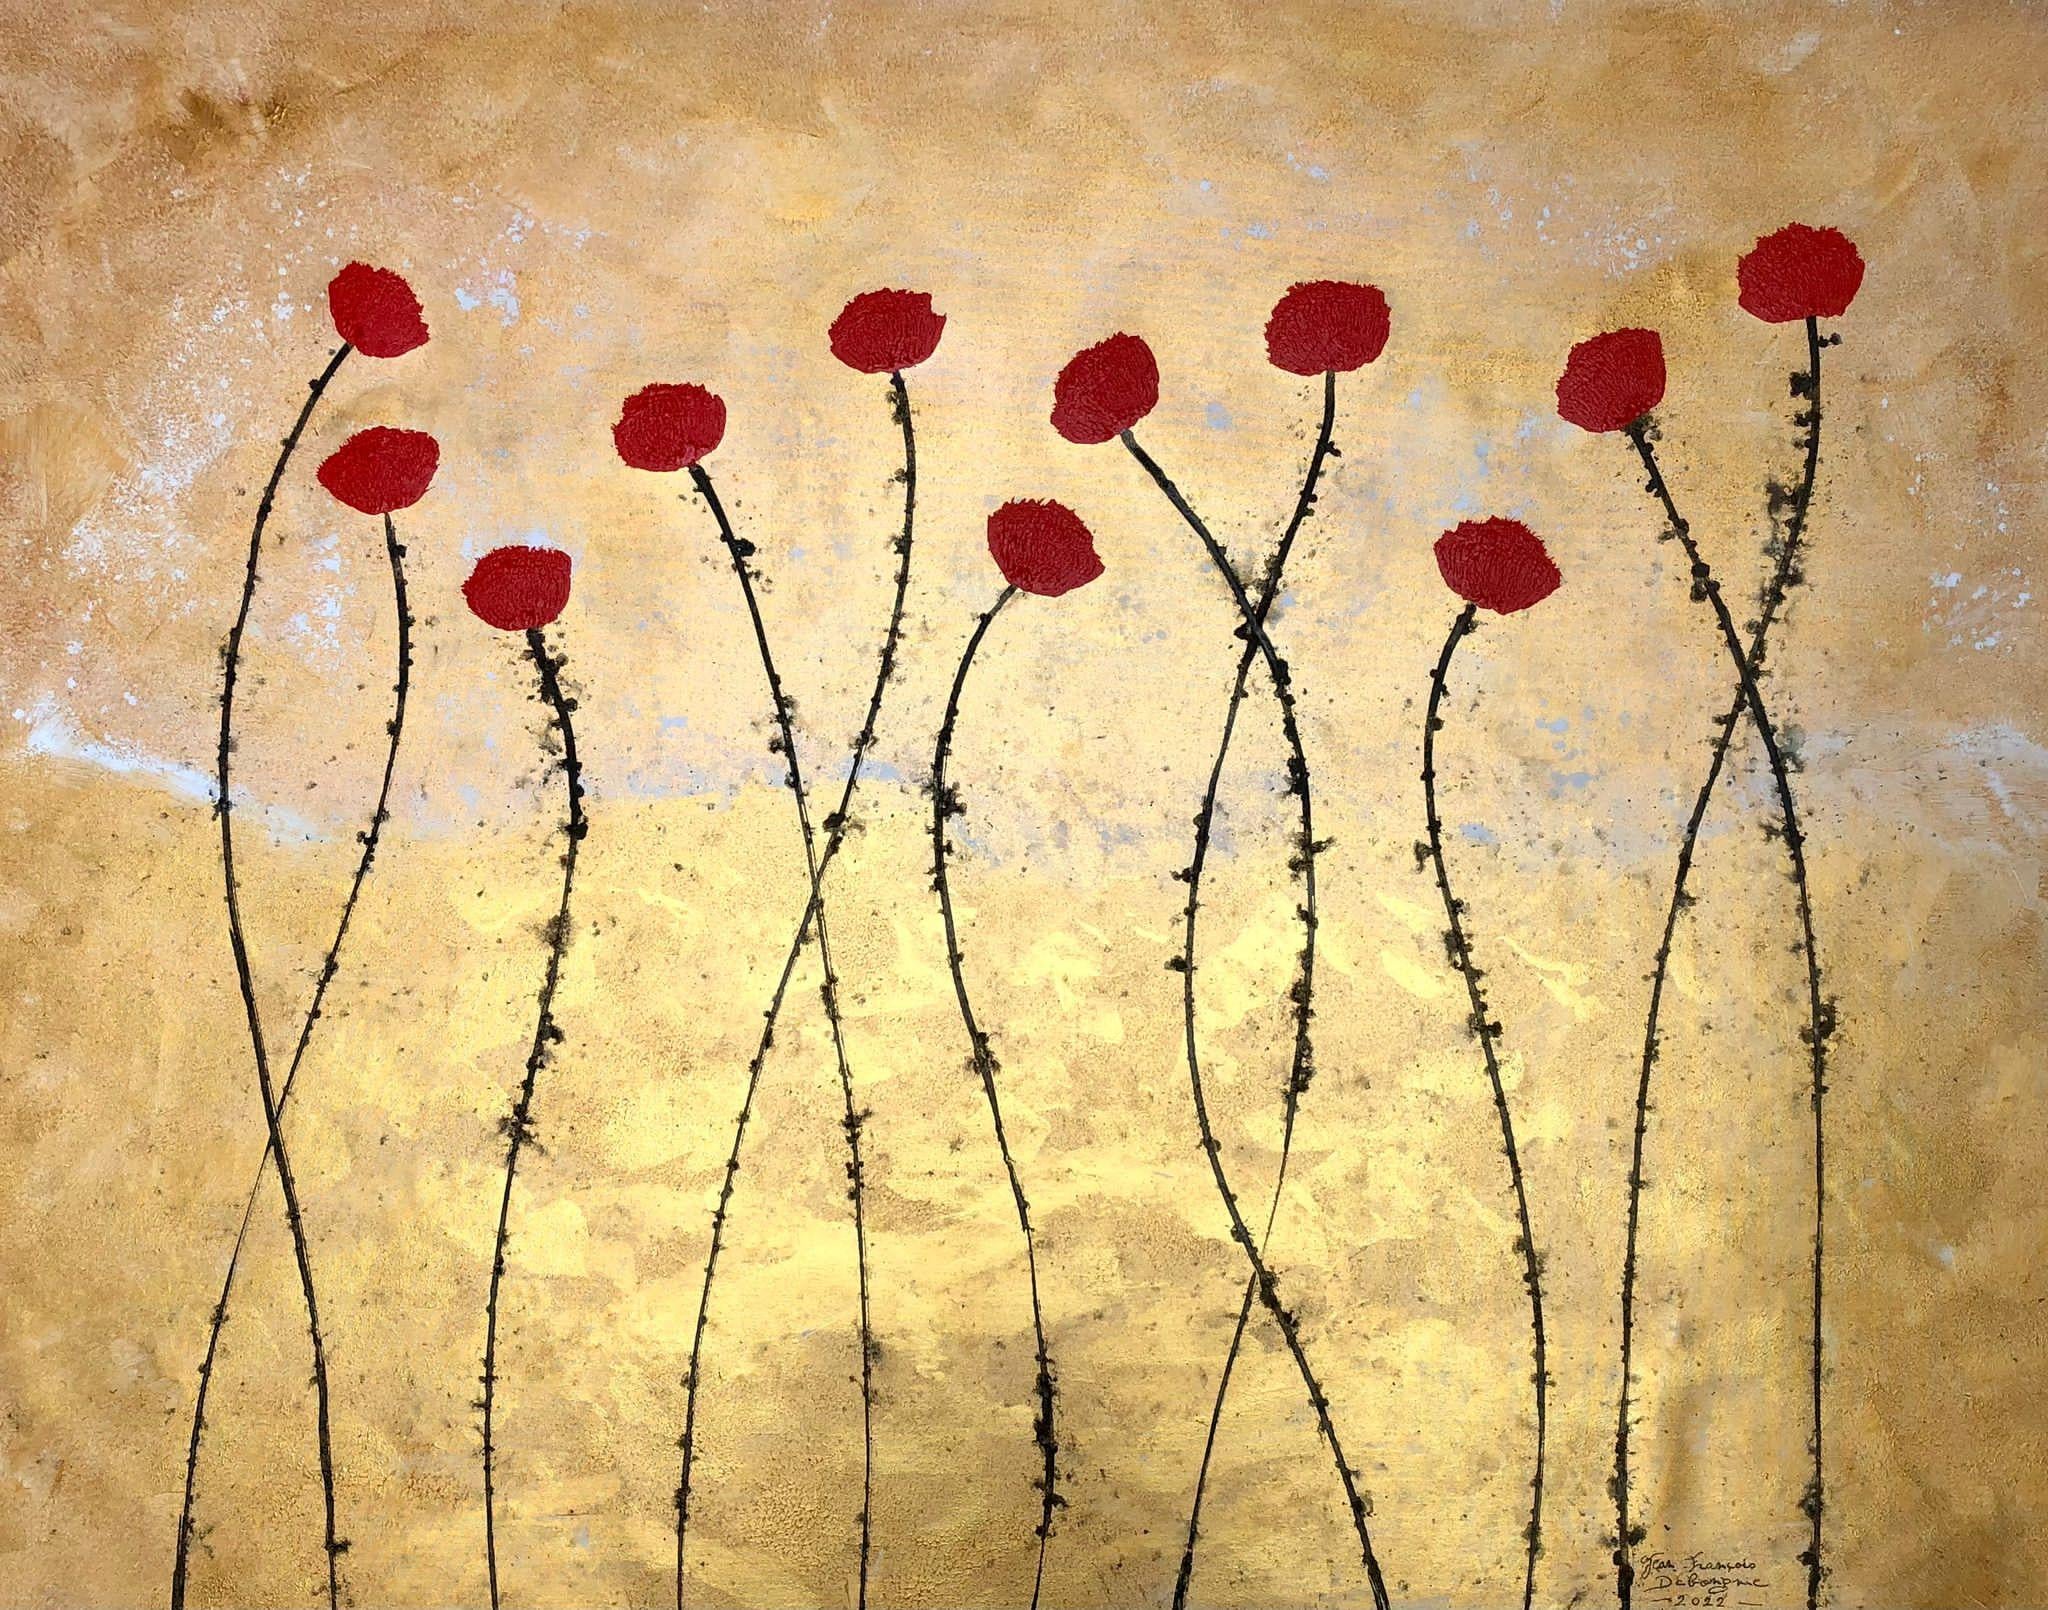 "Les Fleurs" 80x100cm floral painting acrylic ink on canvas nature calm gold red - Mixed Media Art by Jean Francois Debongnie